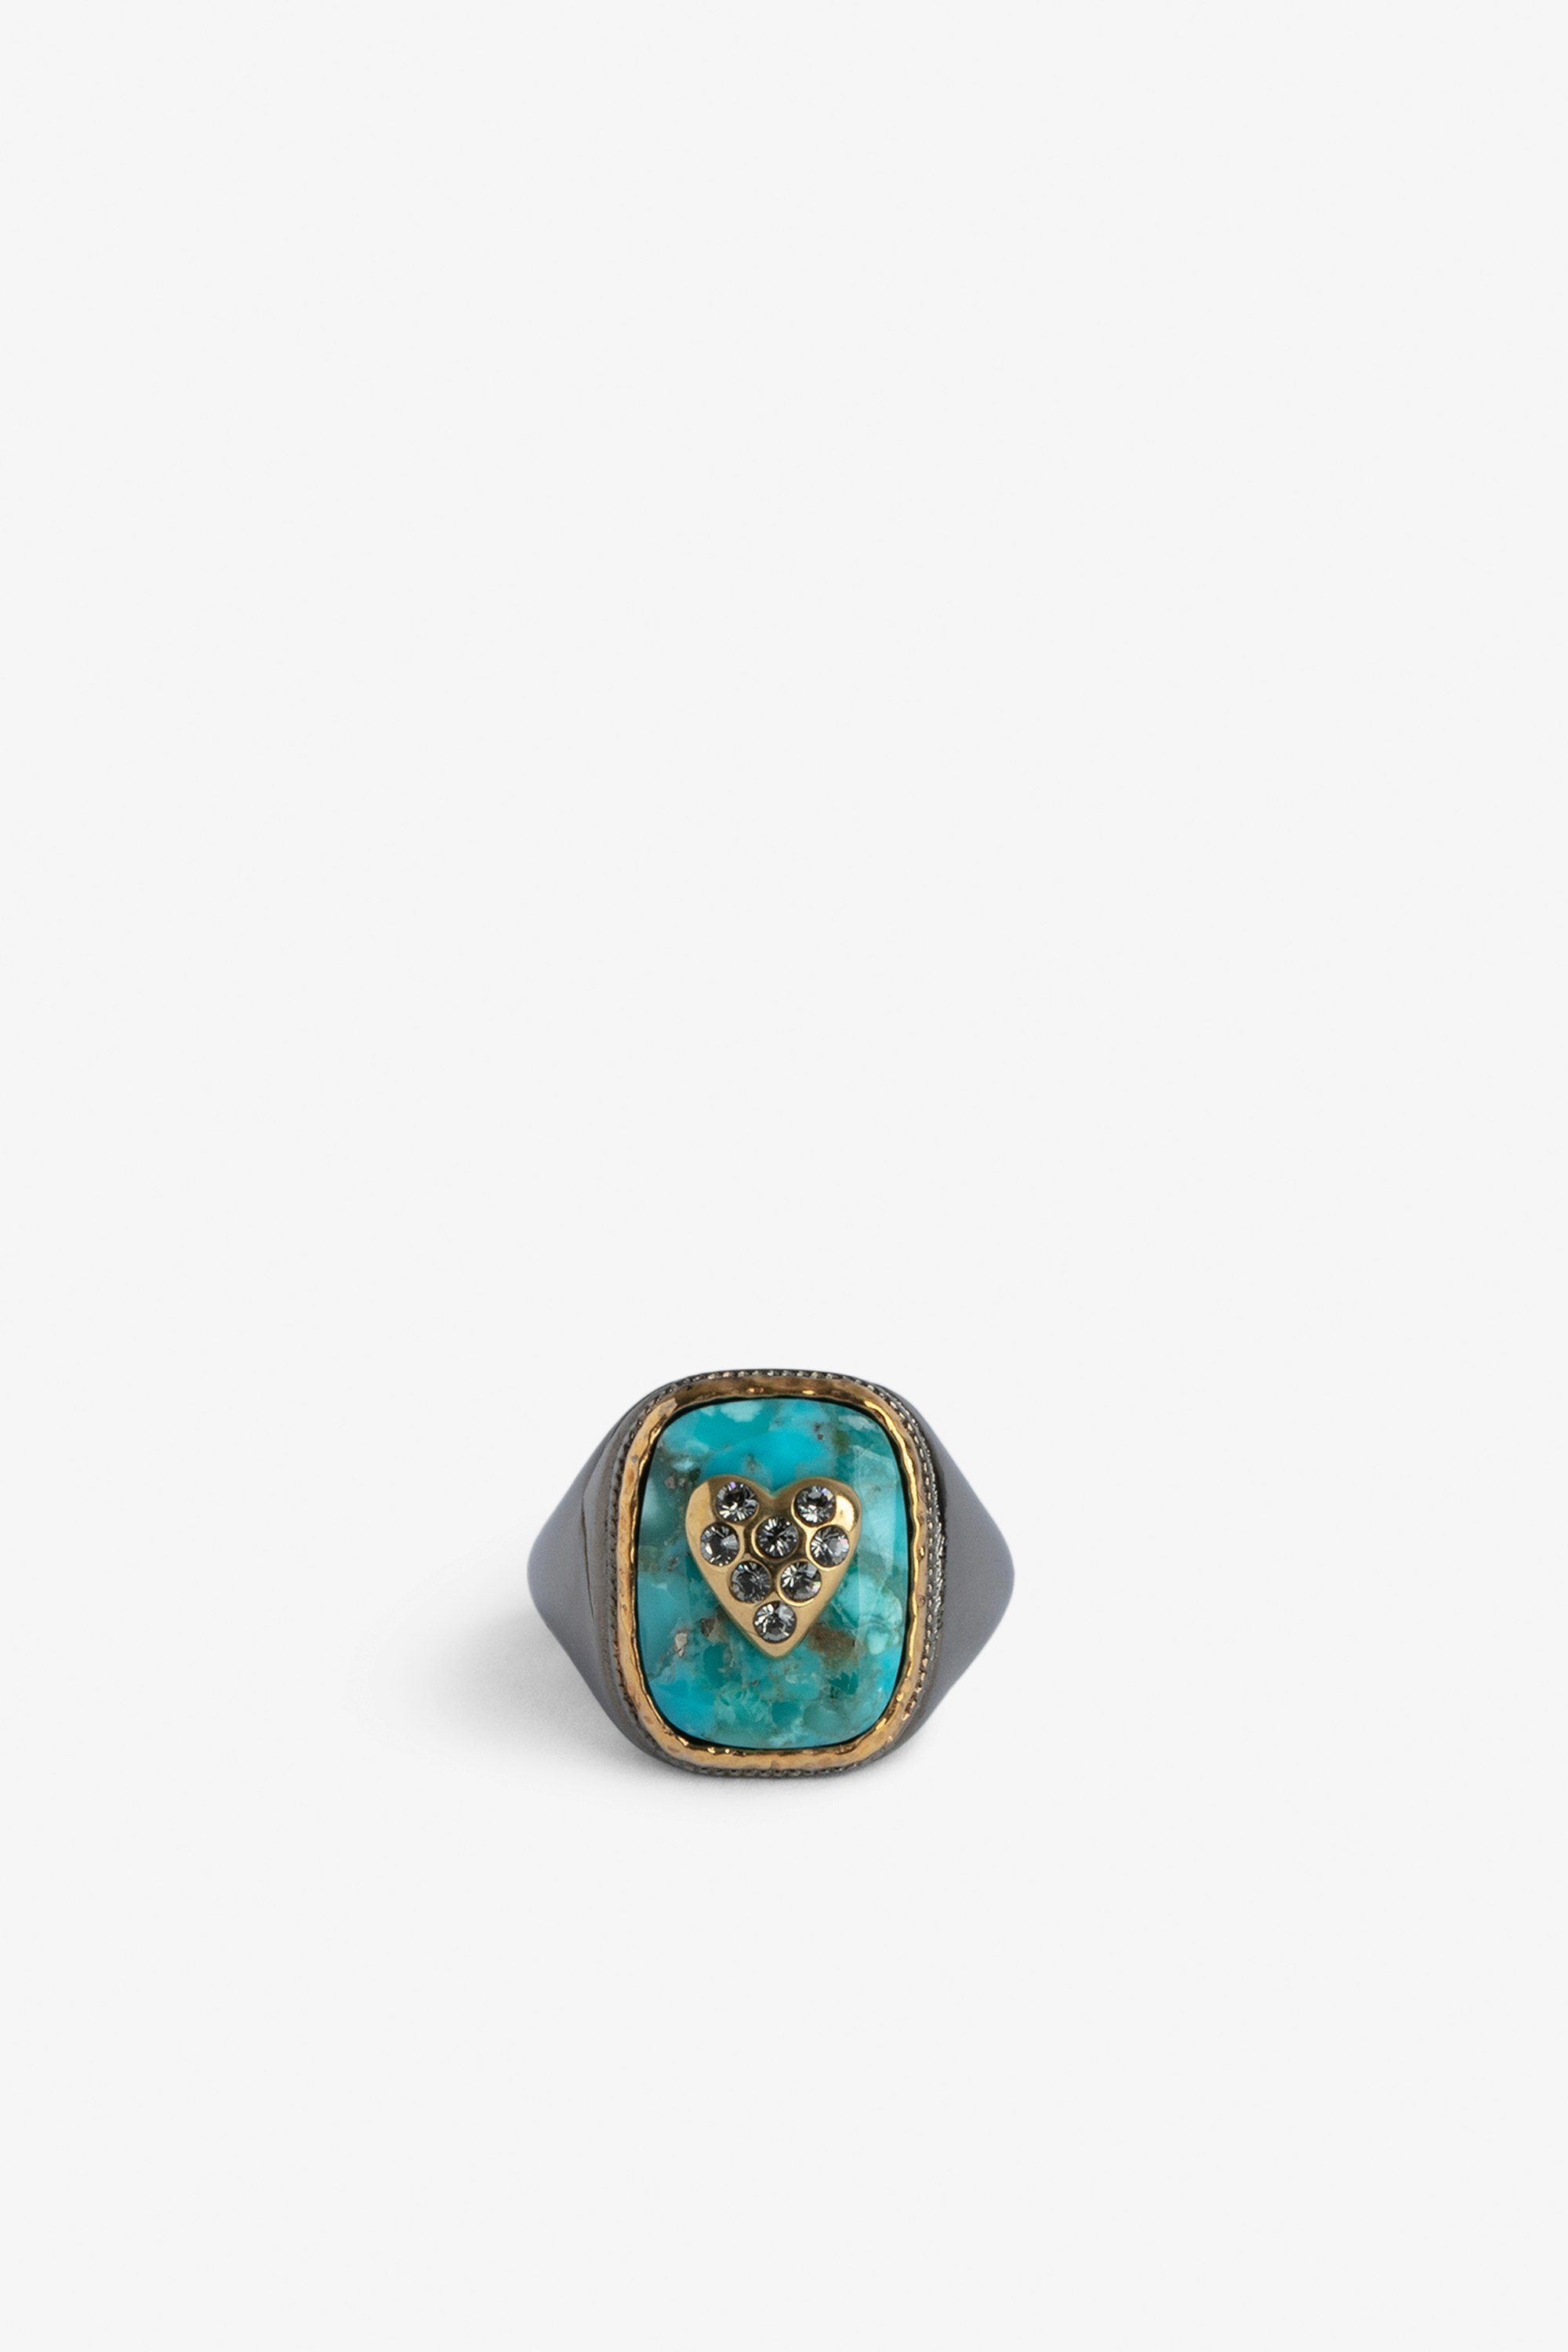 Heart Signet Ring Blue and gold-tone signet ring set with a gold-tone brass heart.